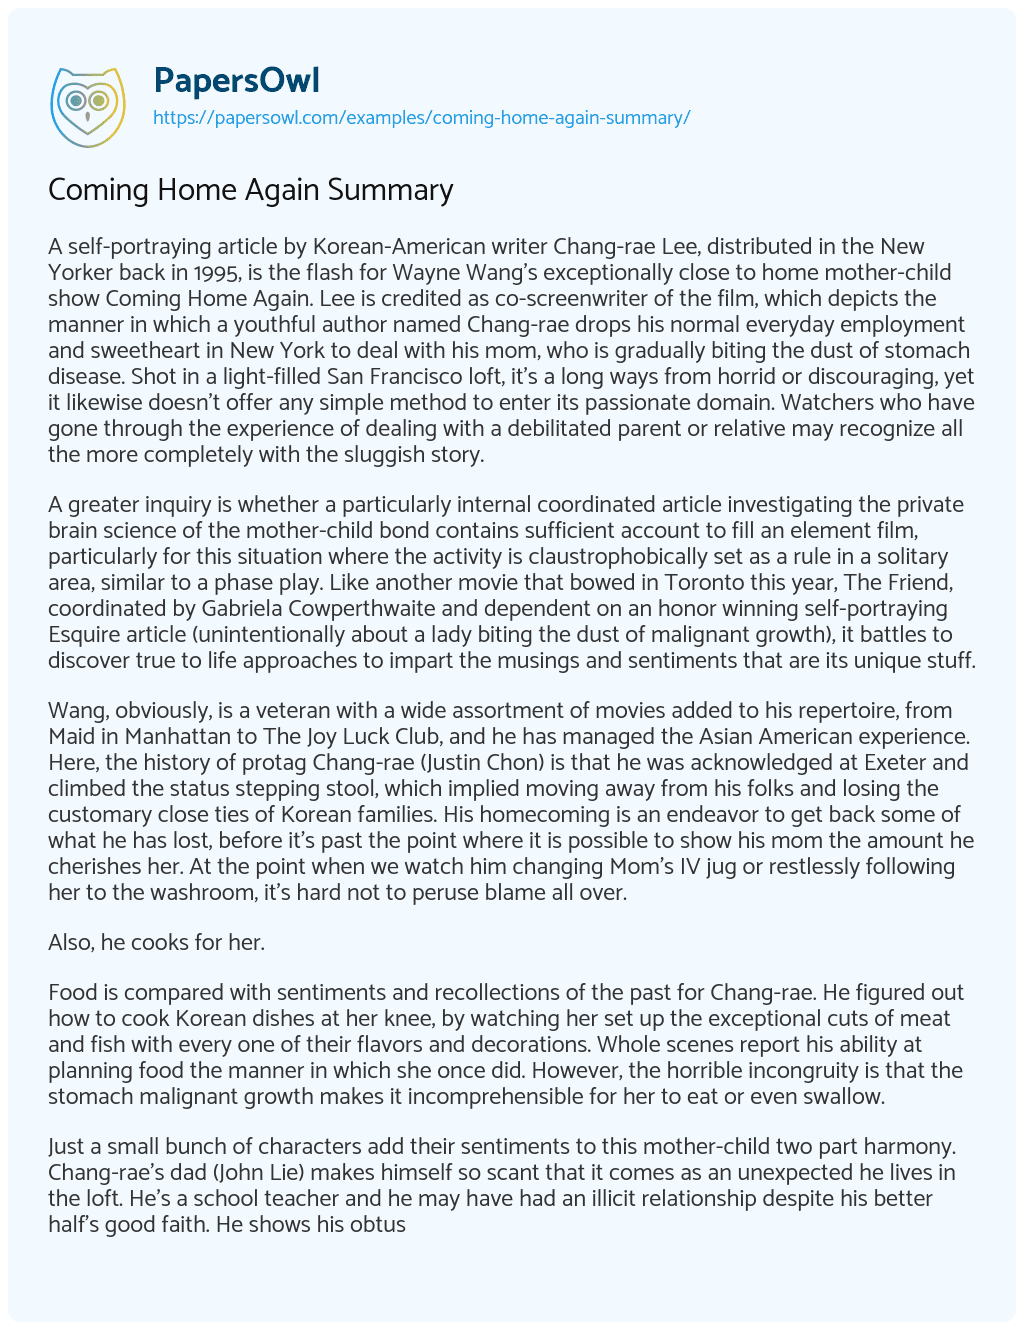 Essay on Coming Home again Summary